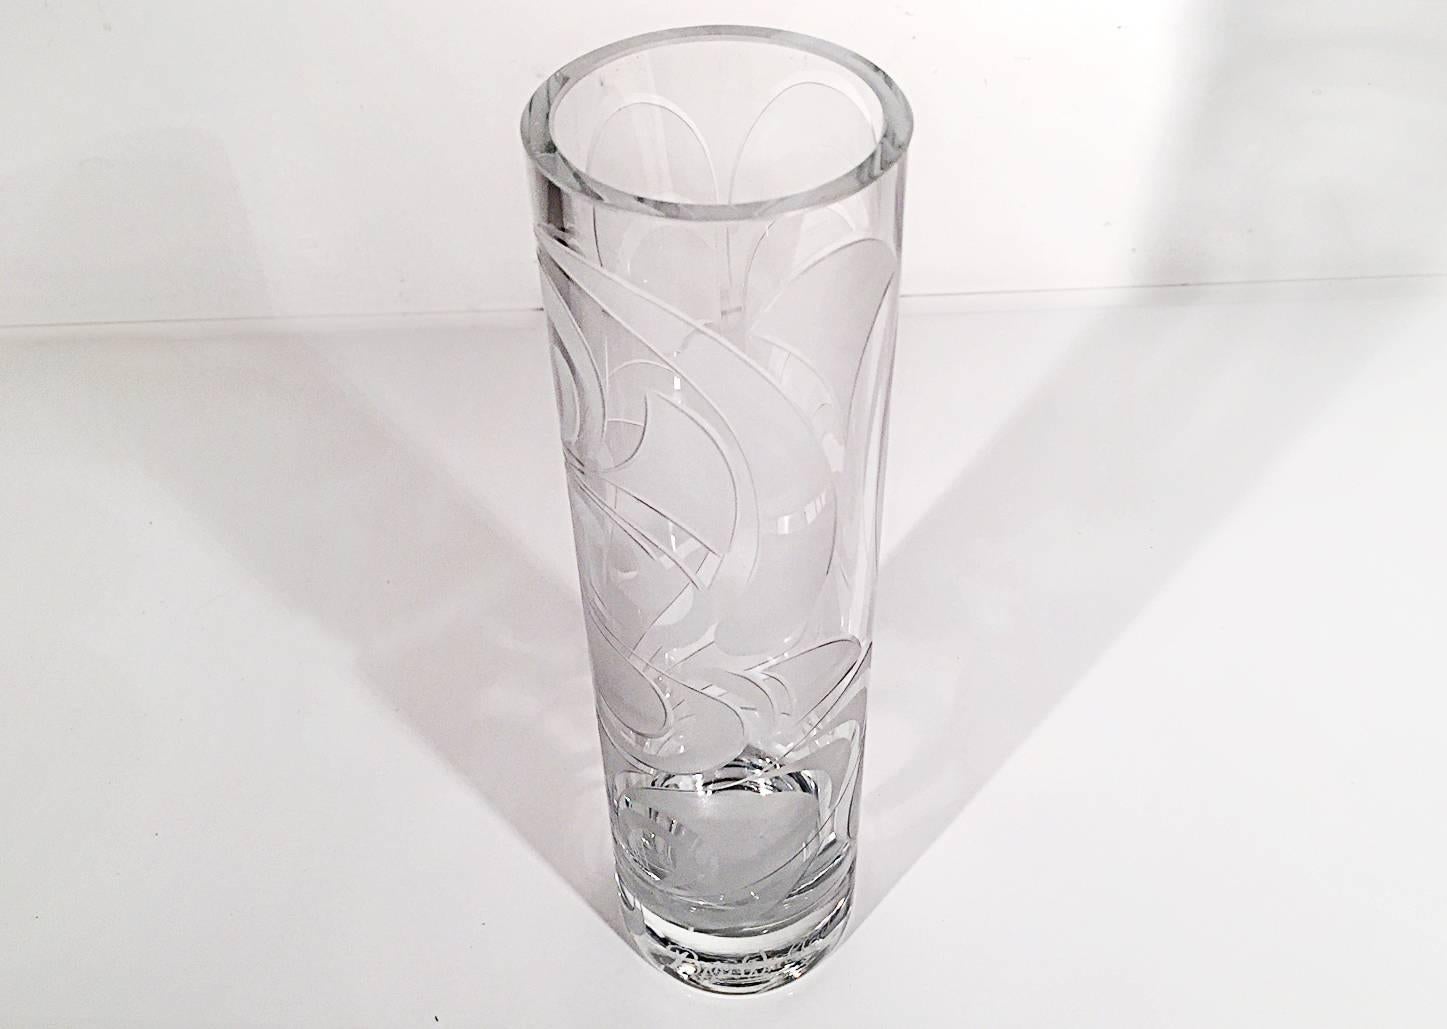 Tall and slender vase etched with a playful swirl pattern. Etched signature on bottom side. 
Measures:
2.5